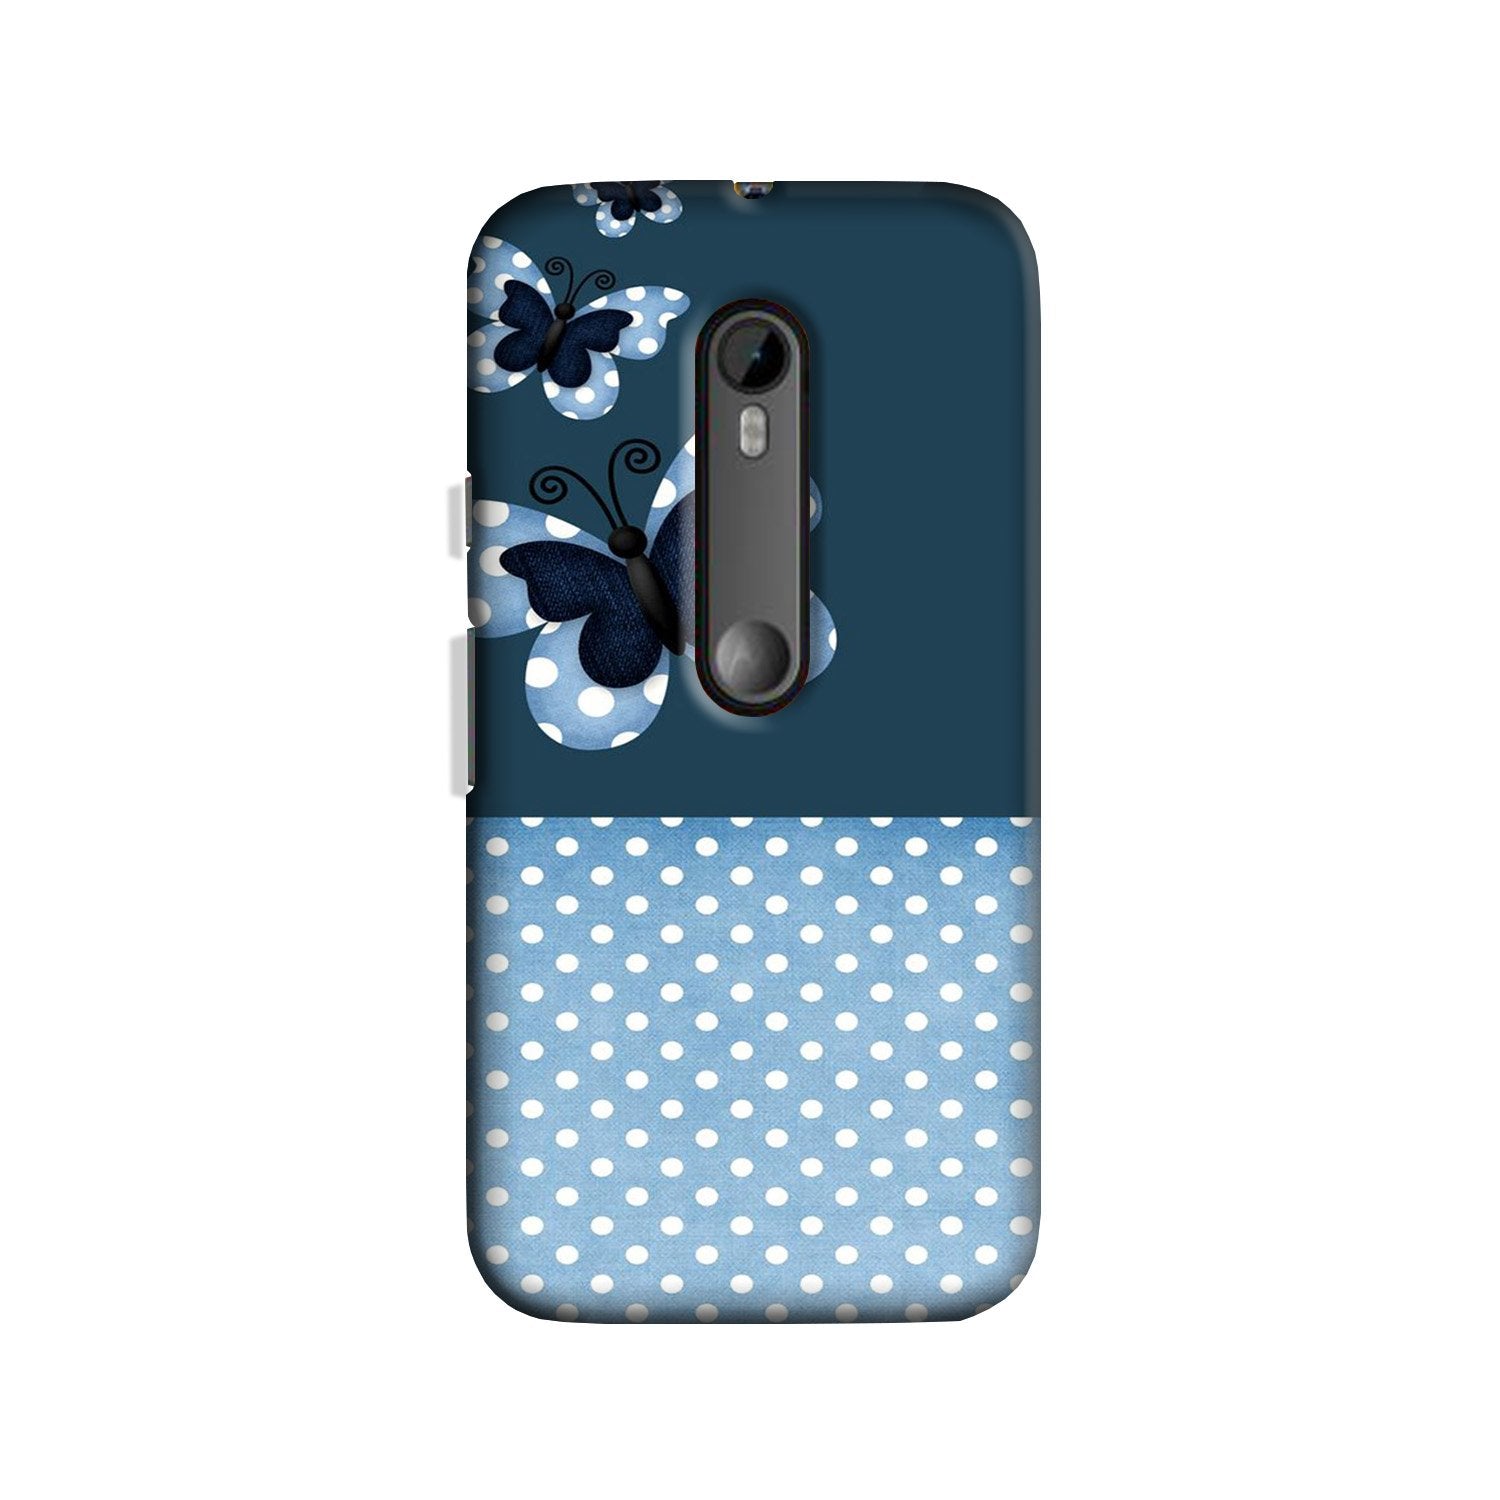 White dots Butterfly Case for Moto X Play